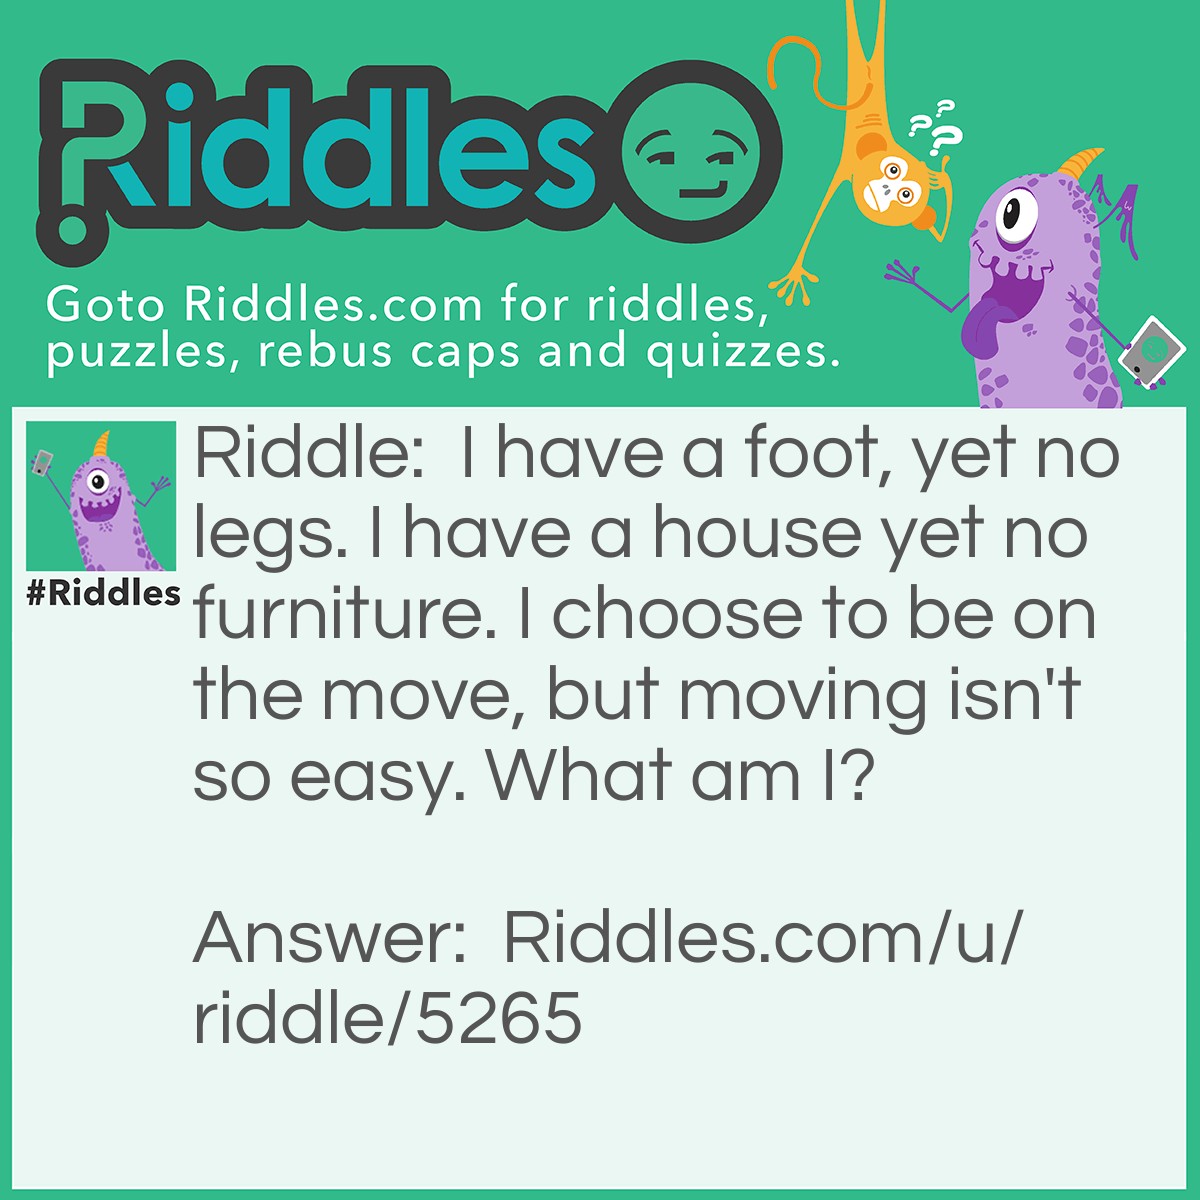 Riddle: I have a foot, yet no legs. I have a house yet no furniture. I choose to be on the move, but moving isn't so easy. What am I? Answer: I am a snail.